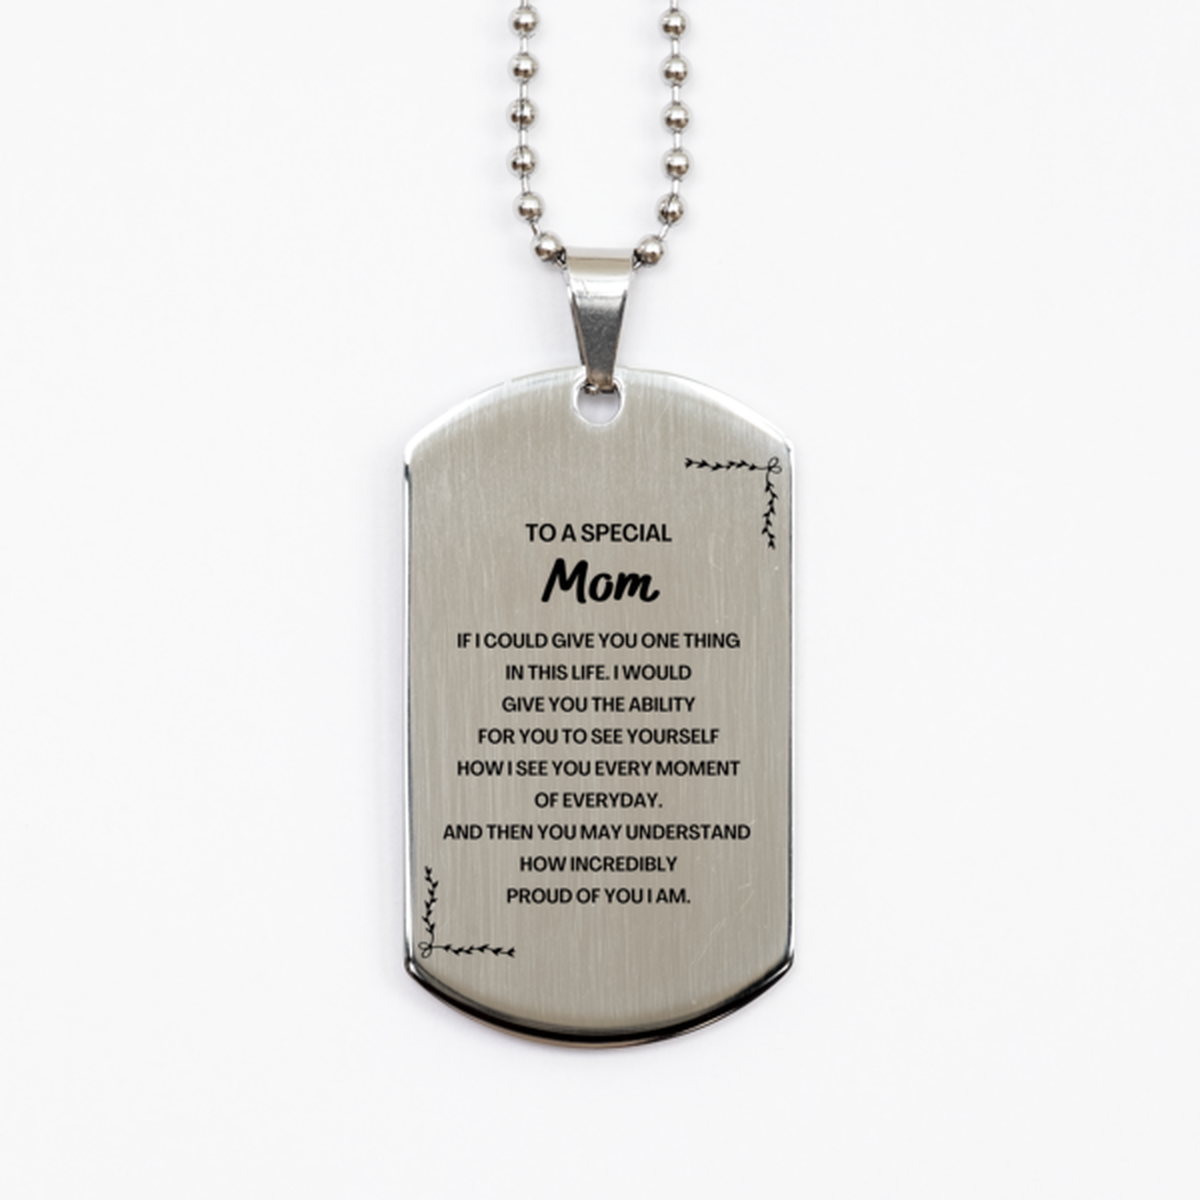 To My Mom Silver Dog Tag, Gifts For Mom Engraved, Inspirational Gifts for Christmas Birthday, Epic Gifts for Mom To A Special Mom how incredibly proud of you I am